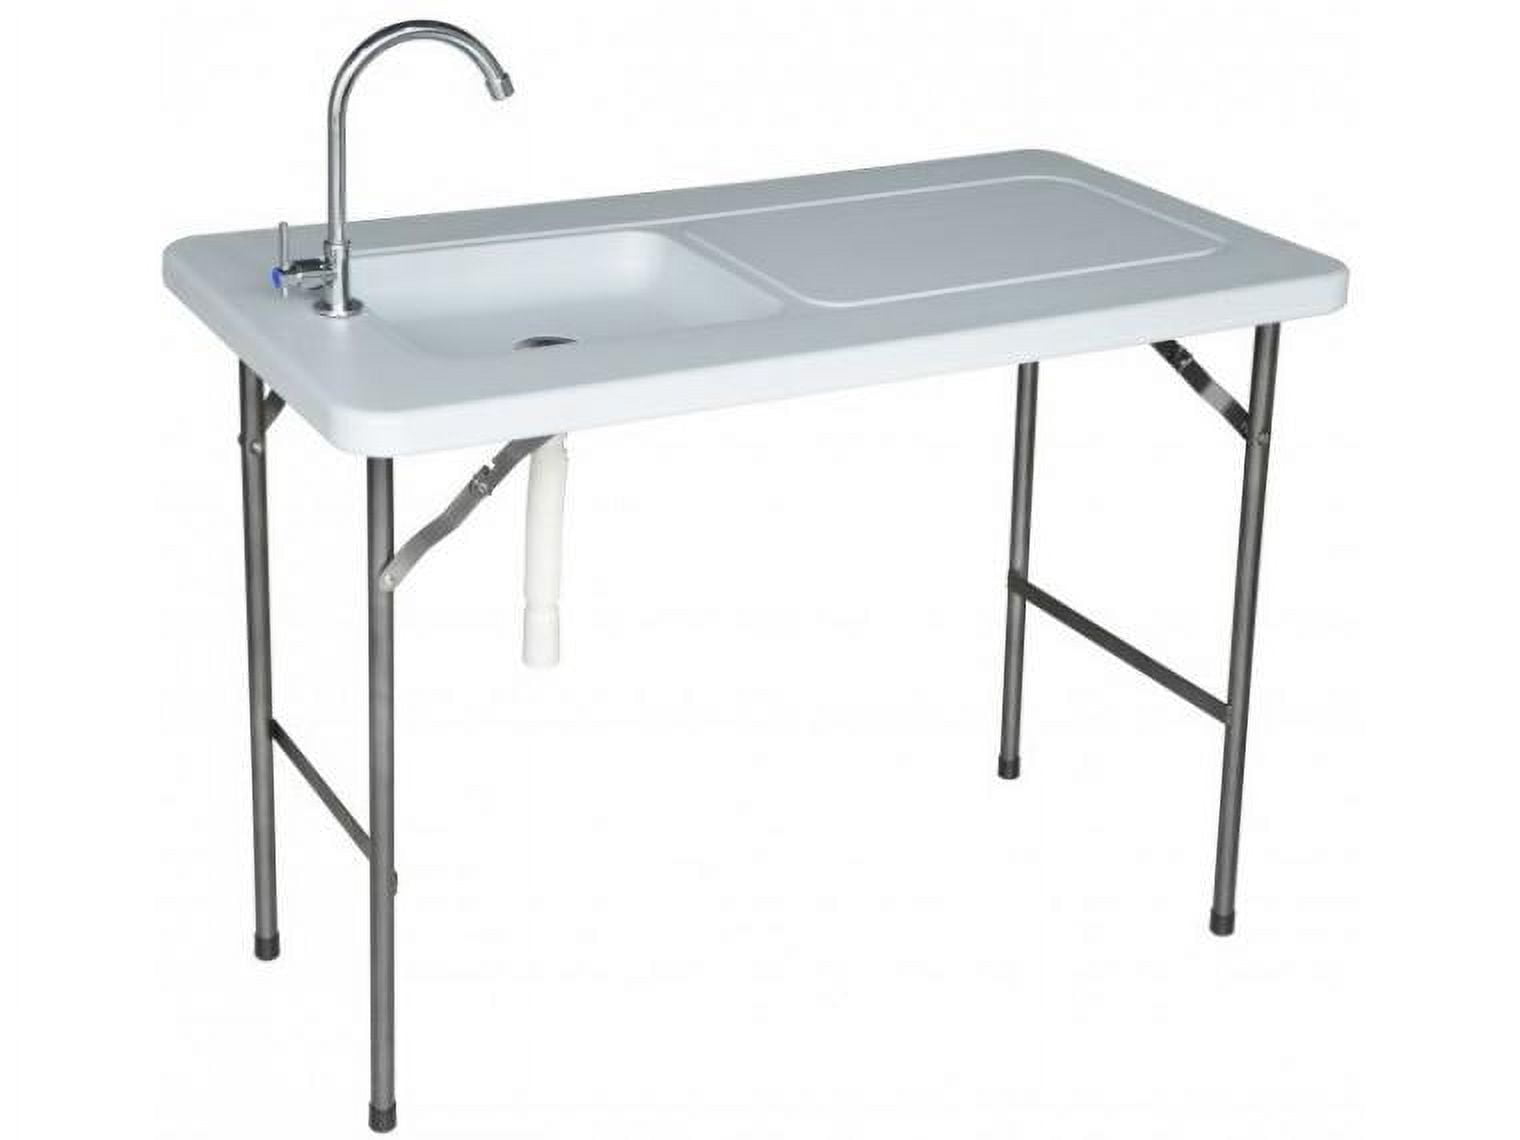 DFG Offroad Portable Sink - Perfect for Outdoor Adventures